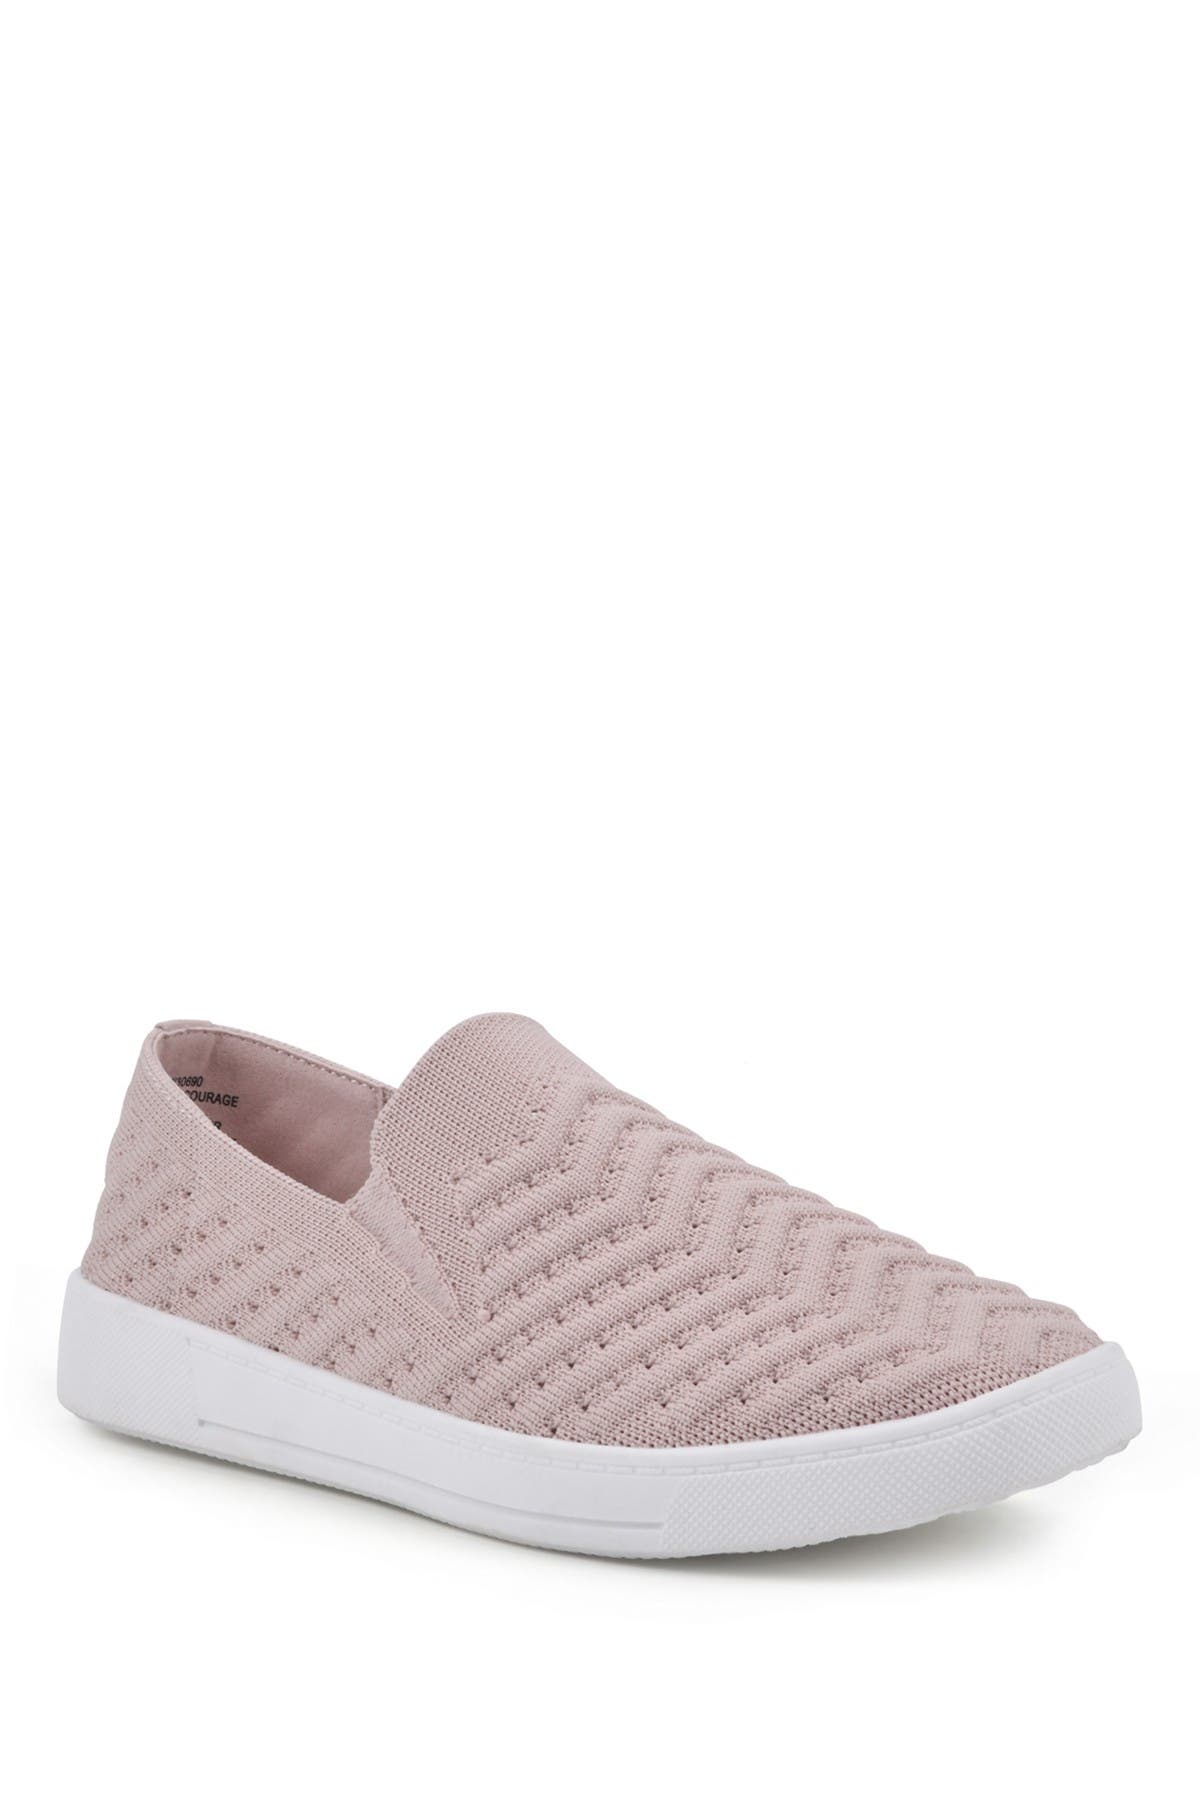 White Mountain Footwear Courage Slip-on Sneaker In Mauve/fabric